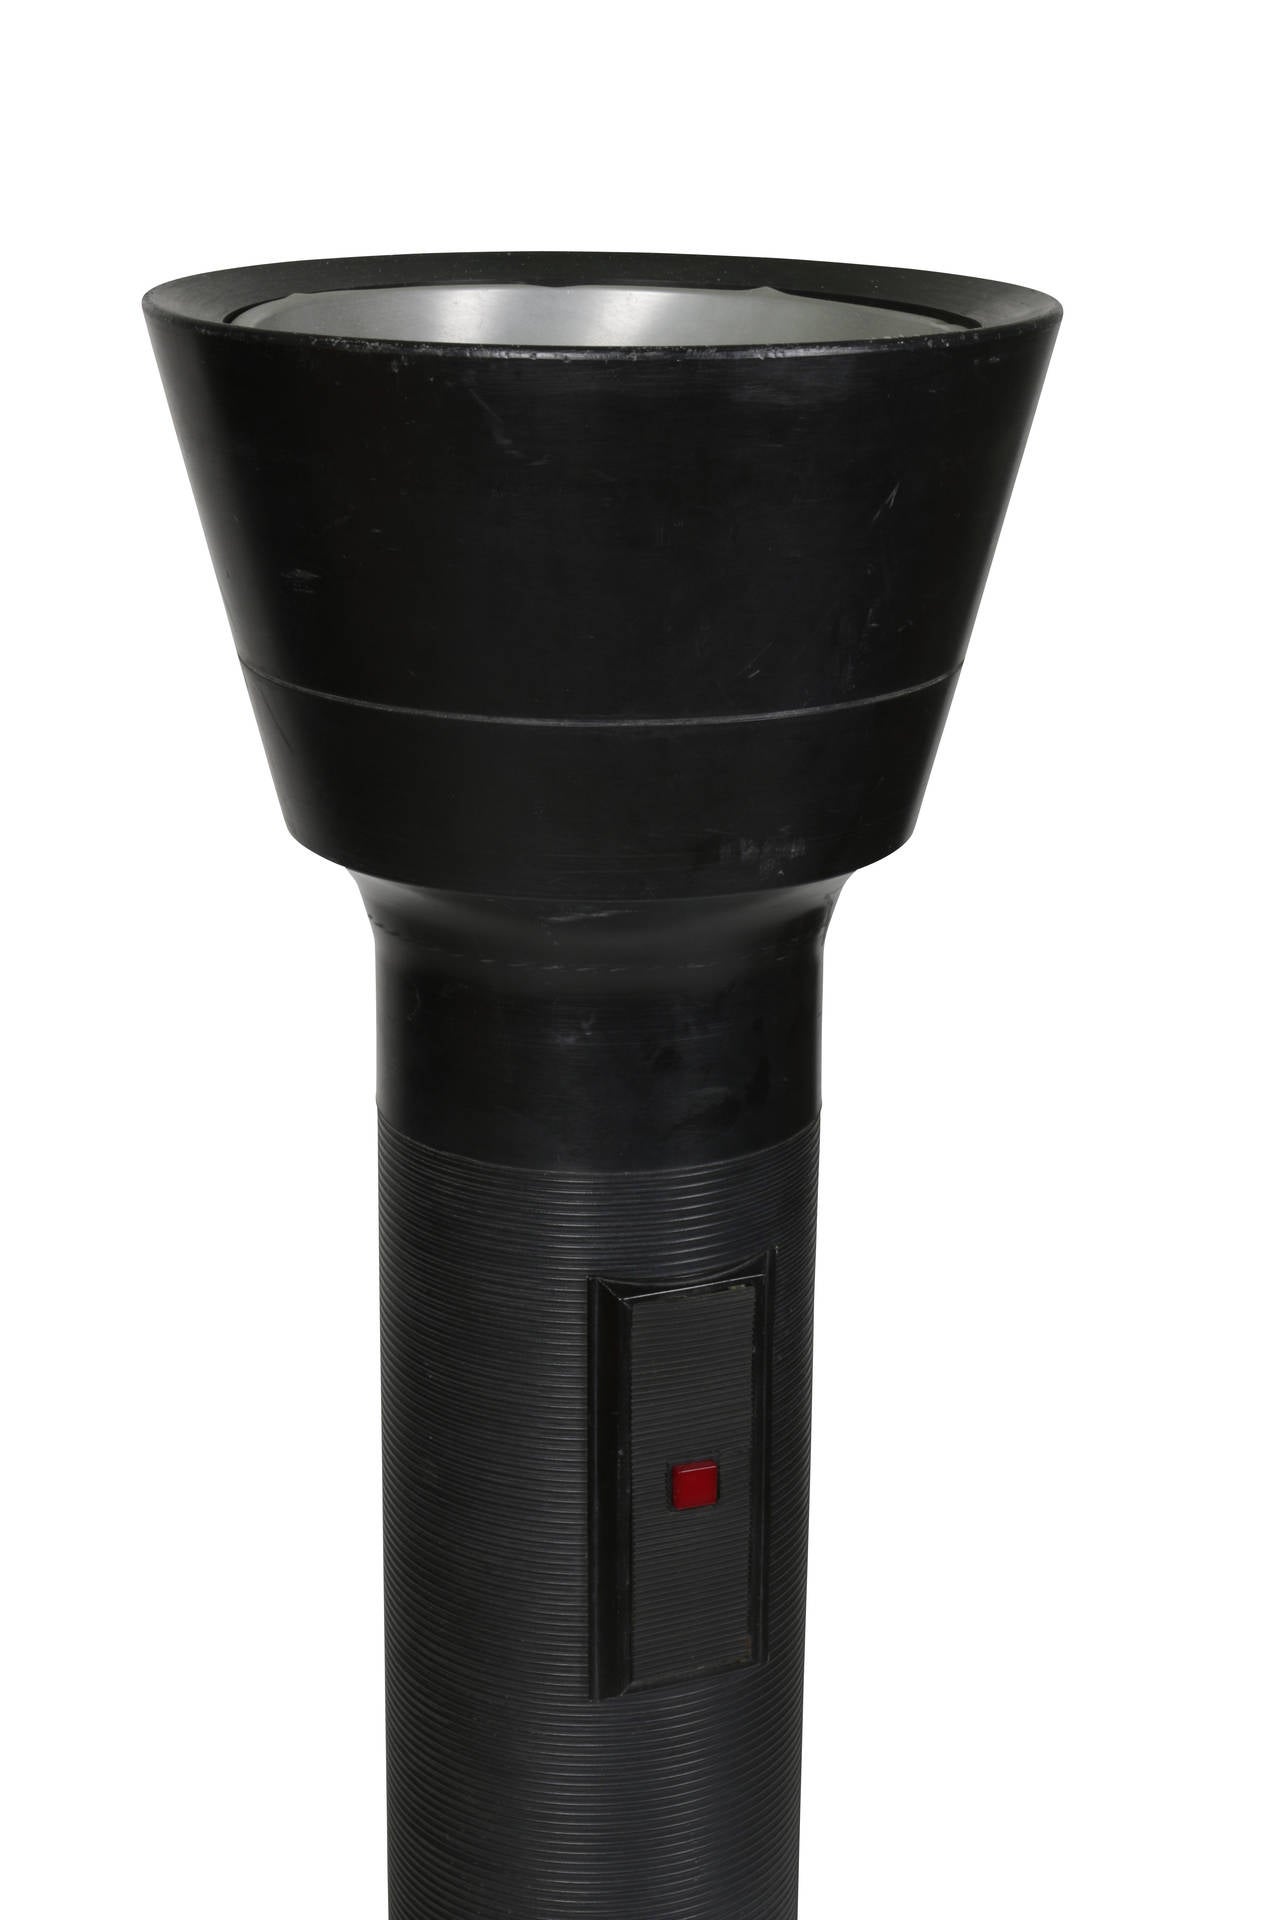 Flashlight floor lamp standing approximately 5 feet tall and has typical flashlight glider on/off switch.